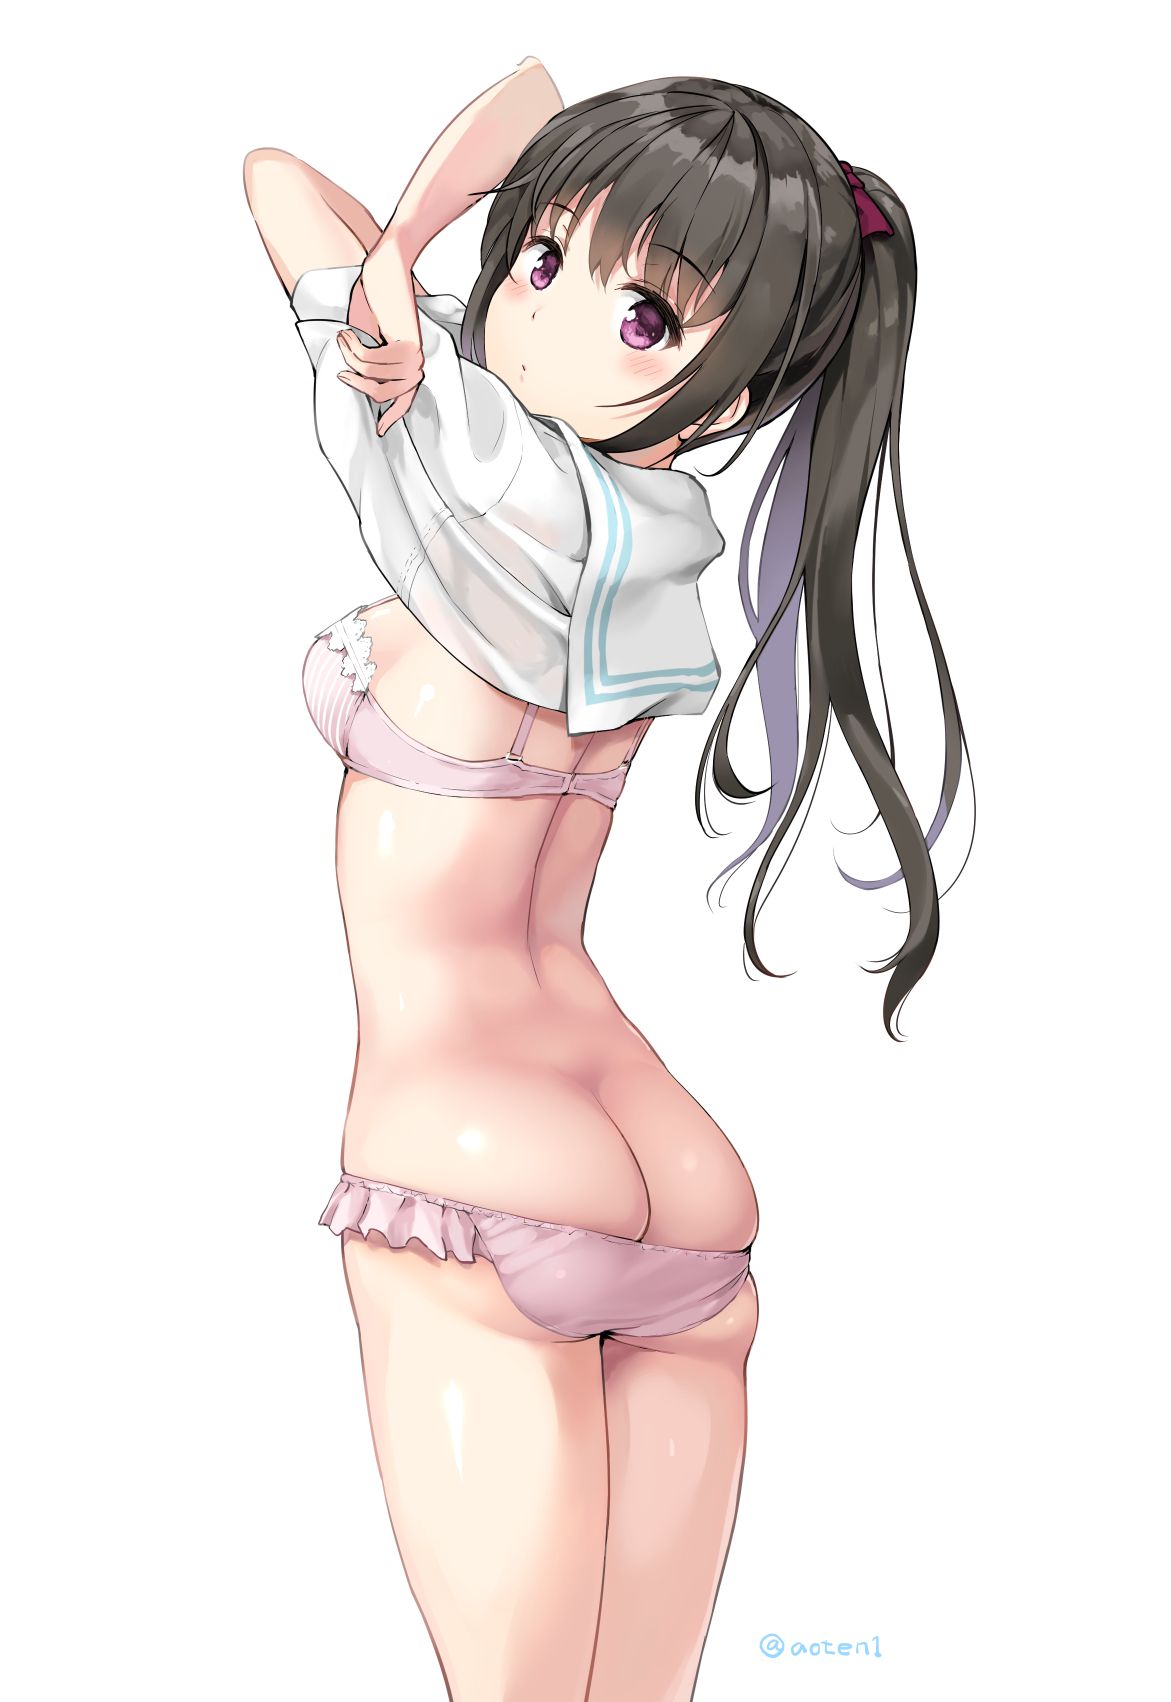 [Erotic photoshop Chara material] PNG background transparent erotic image material such as anime character that 254 64